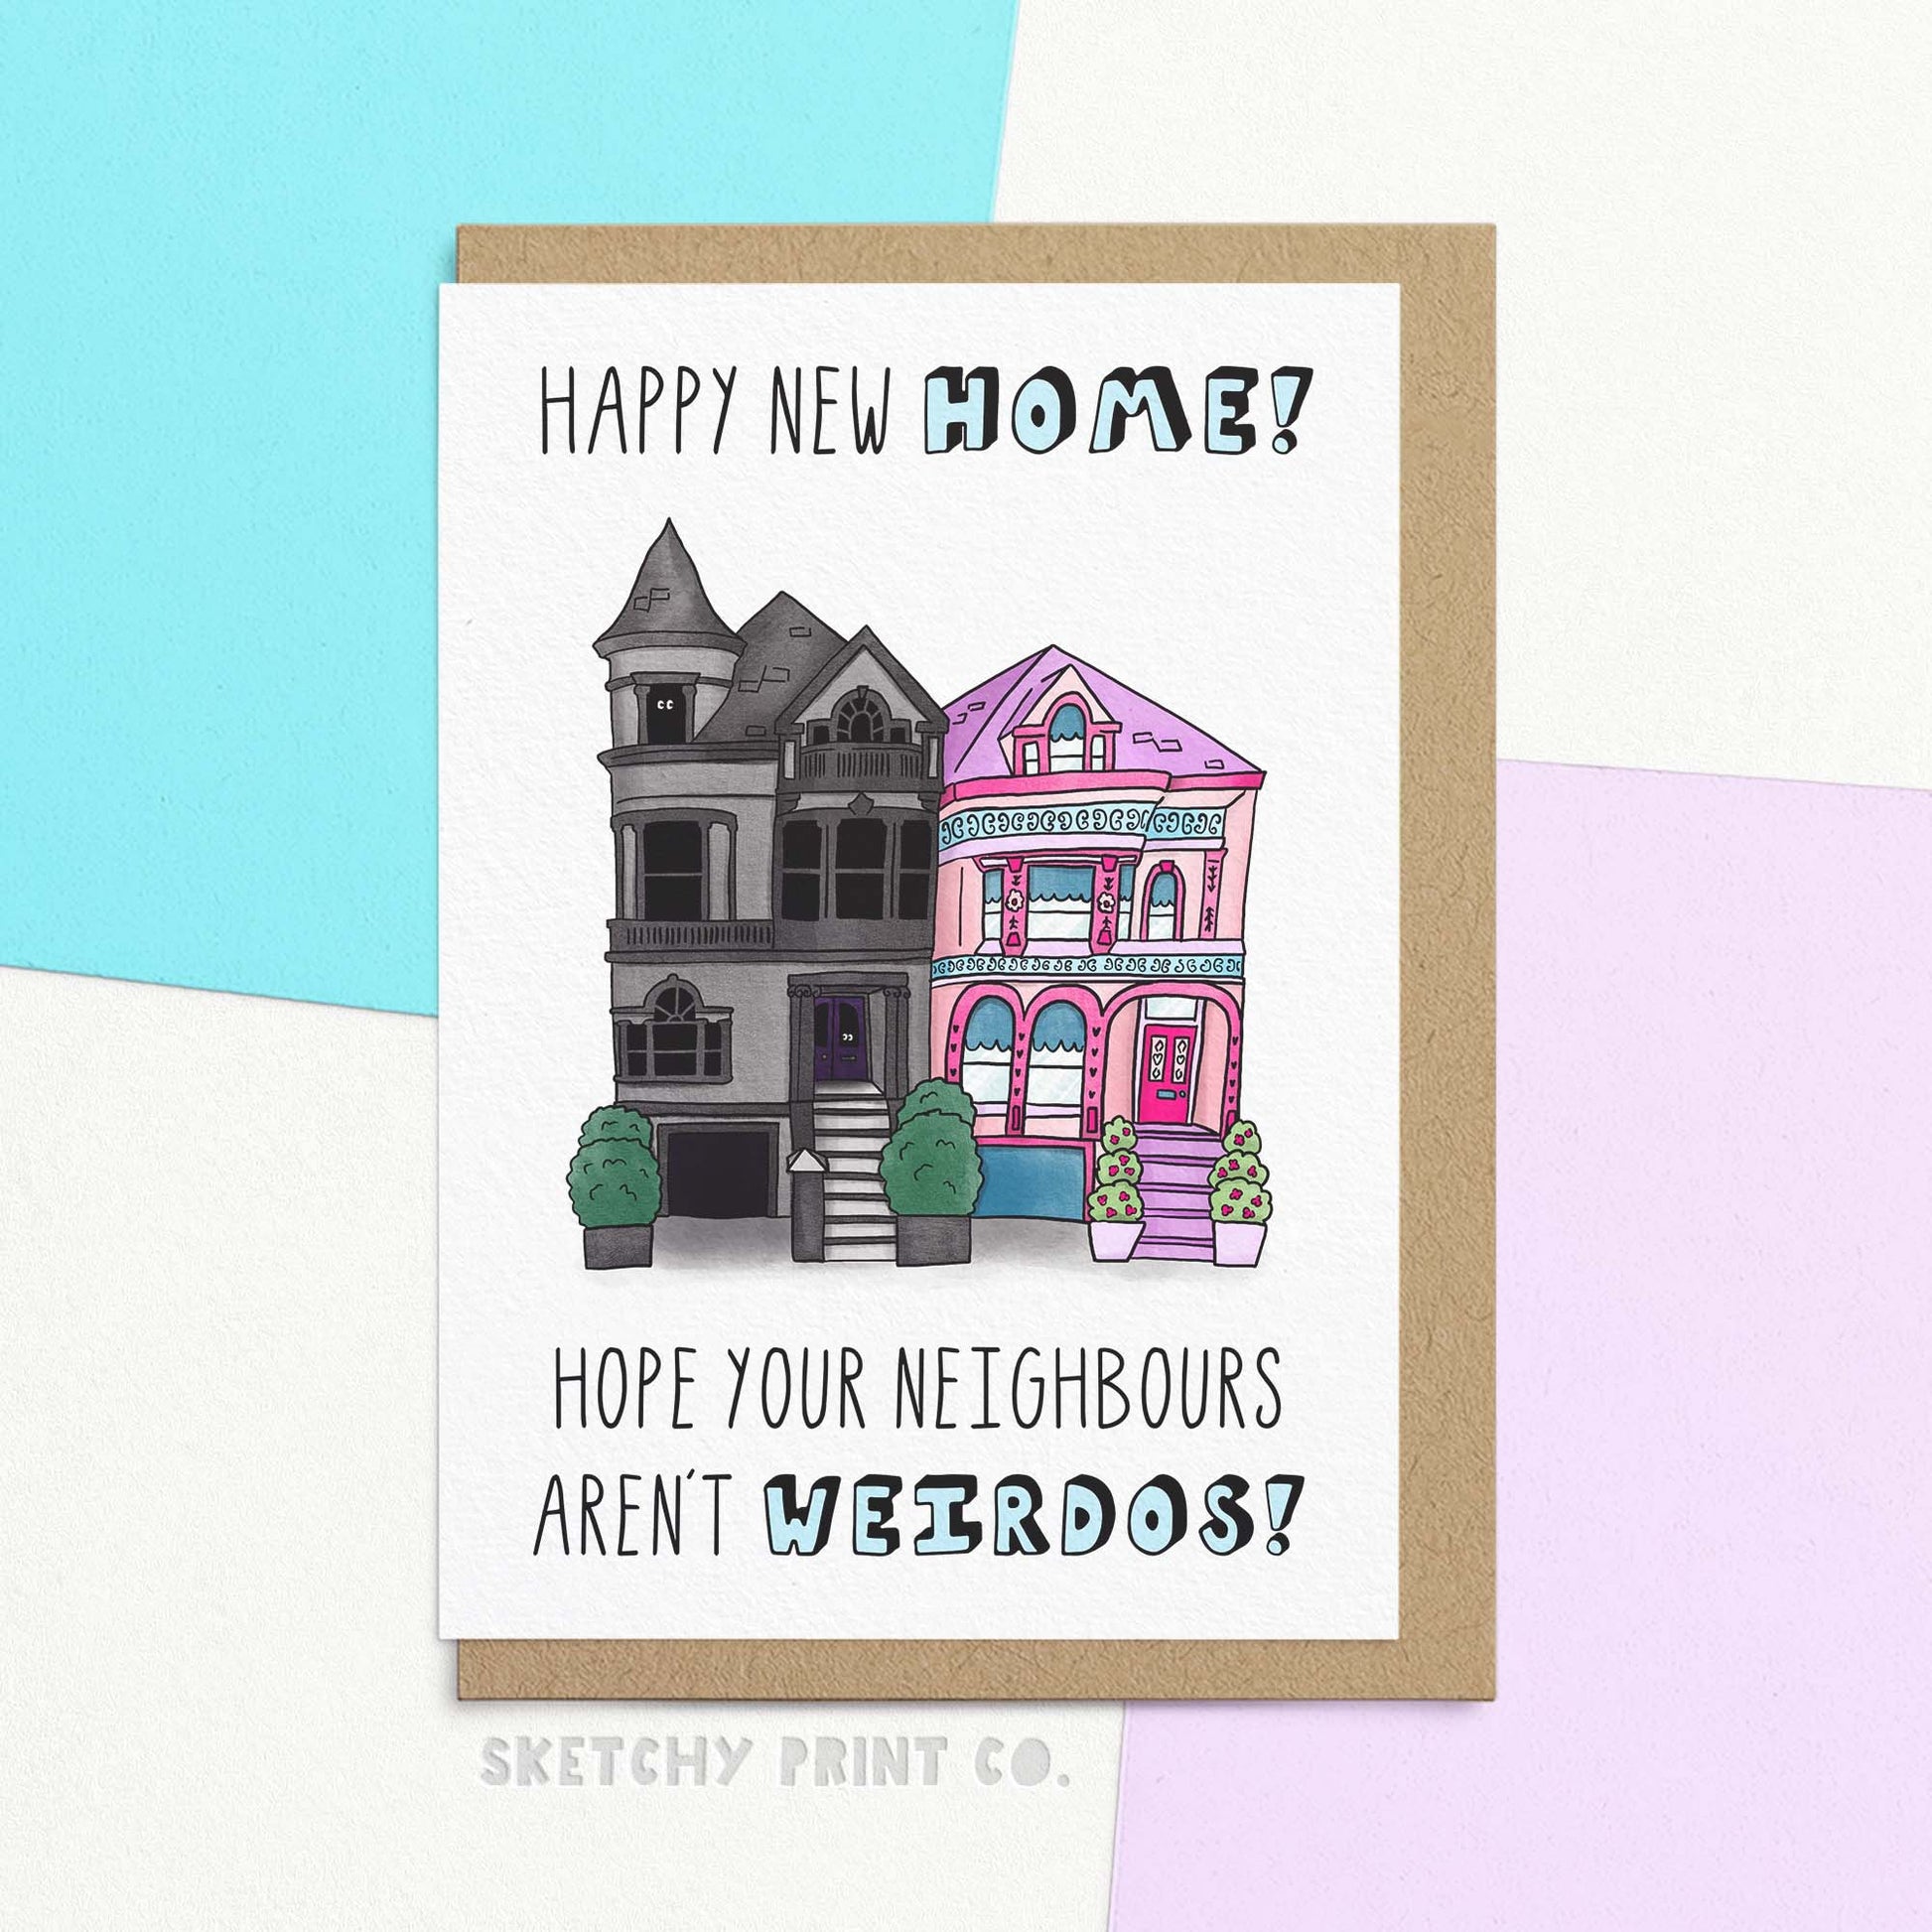 Funny new home / housewarming card reading 'Happy new home! Hope your neighbours aren't weirdos! Featuring an illustration of a spooky gothic house and pink barbie house next to each other. Welcome your friend to their new home with our funny housewarming wishes card and let the whole block know they're living next to the ultimate weirdos! Our FSC-certified paper and compostable packaging make sure you don't have to be weird to feel good about this purchase. Just smile, nod, and send this fun card!